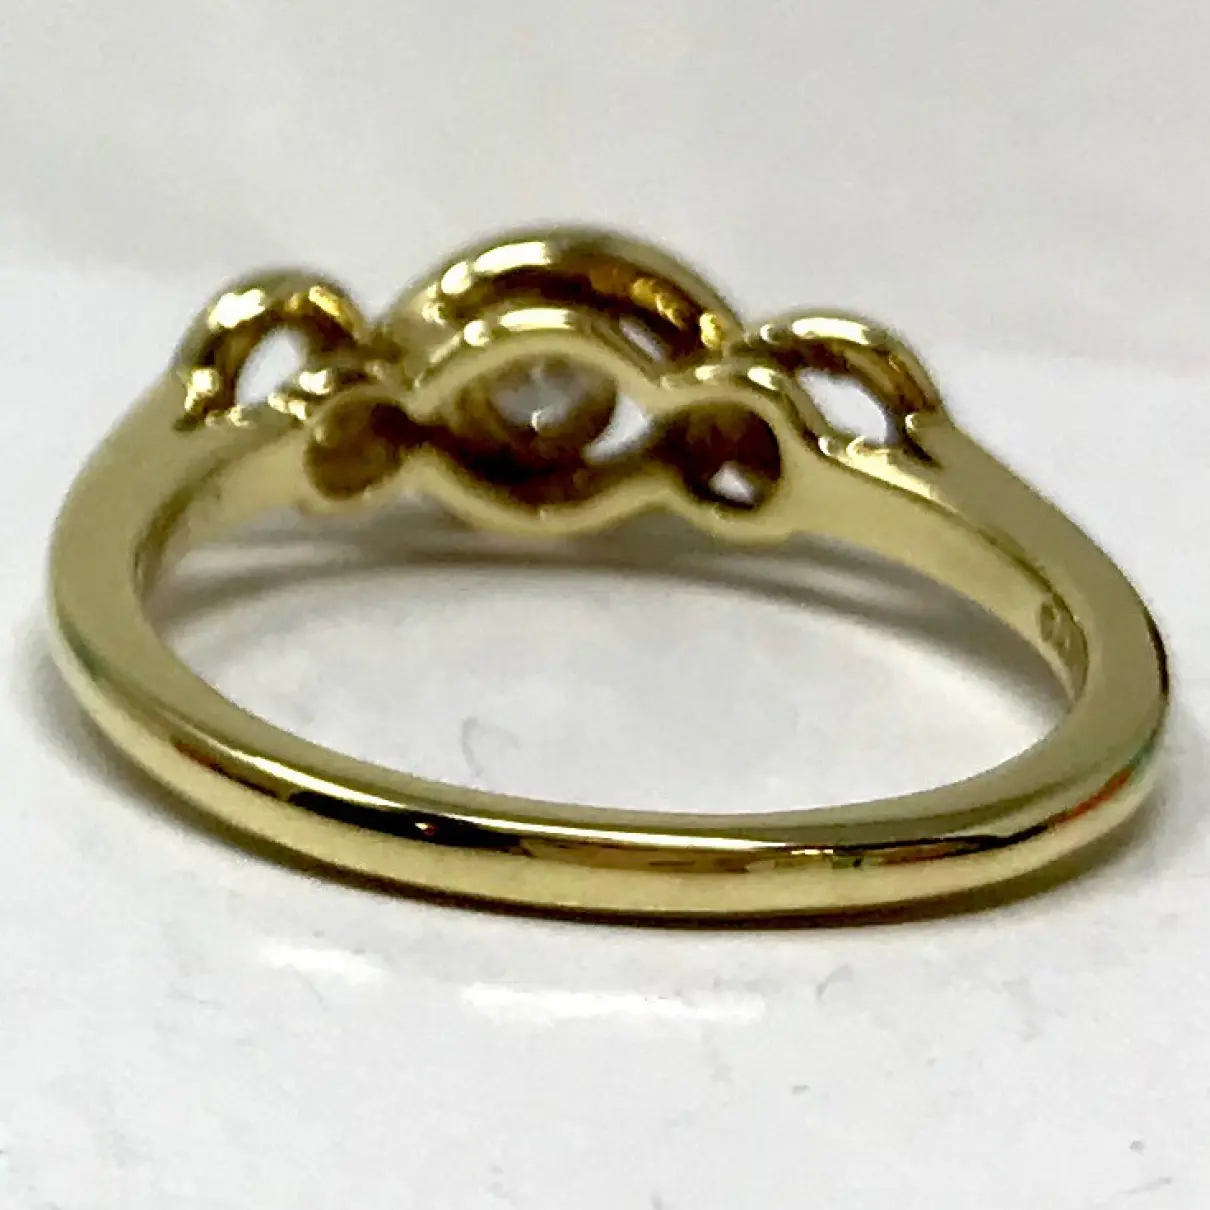 Buy Cartier Yellow gold ring online - Vintage